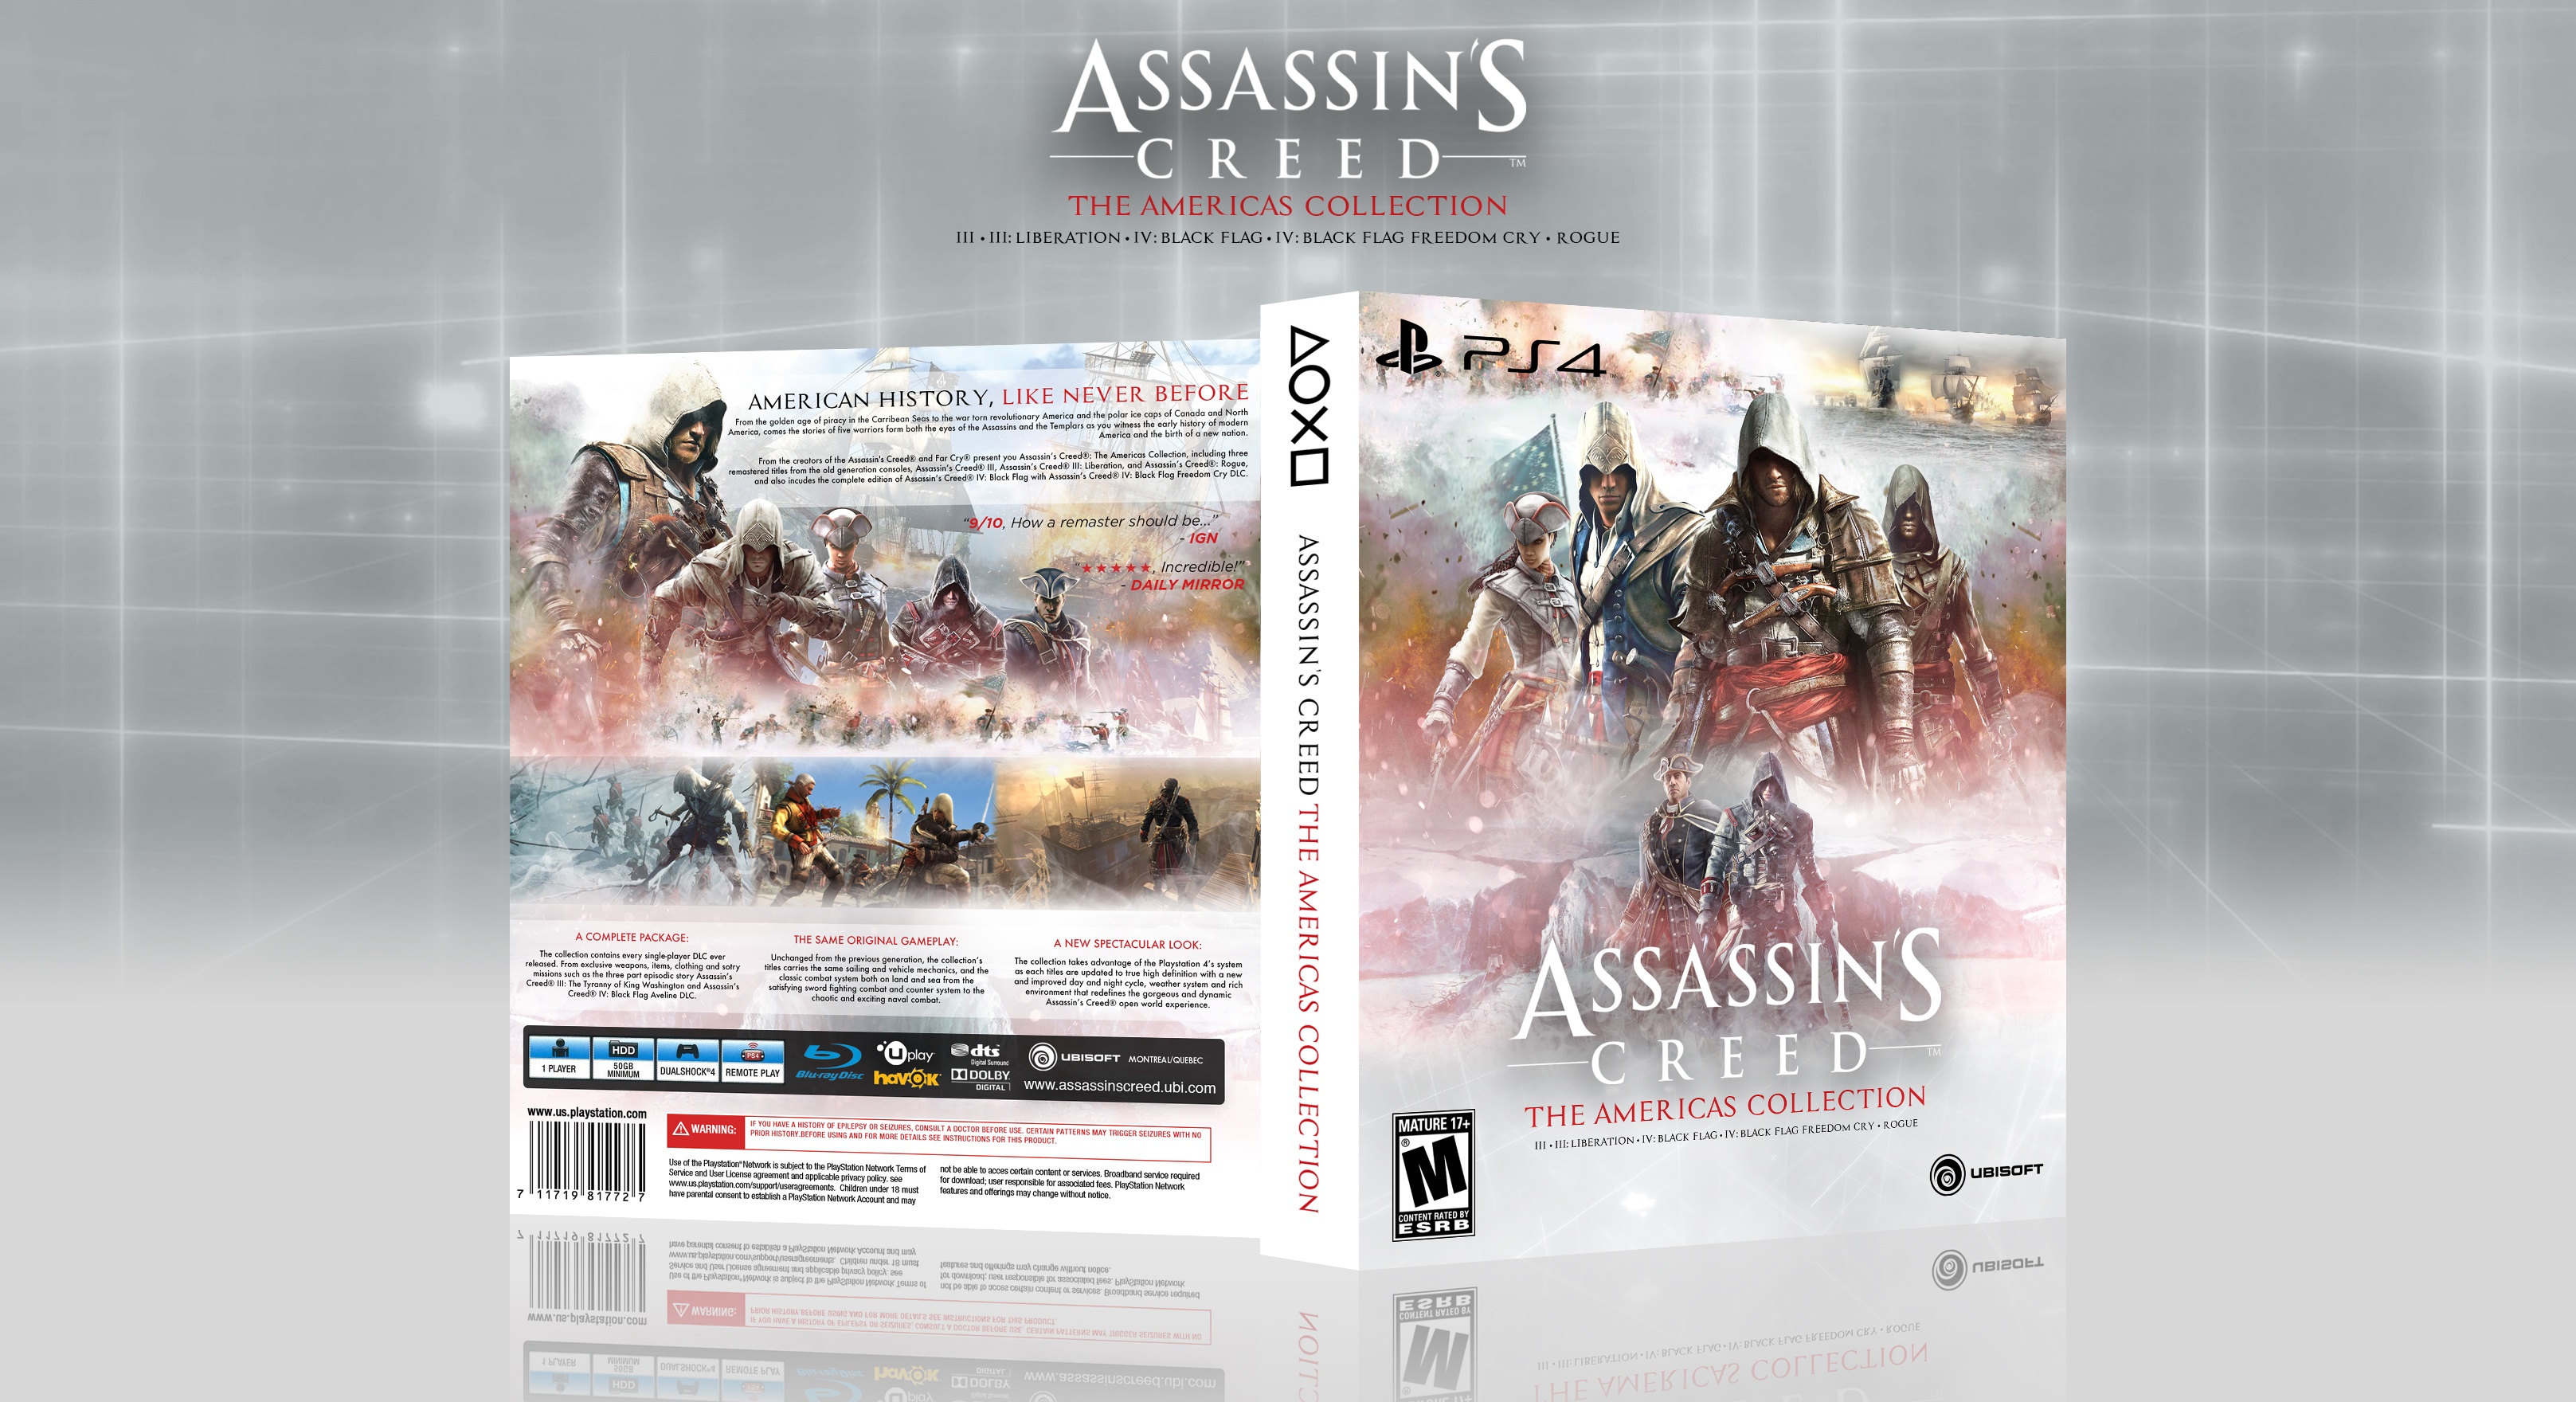 Assassin's Creed: The Americas Collection box cover